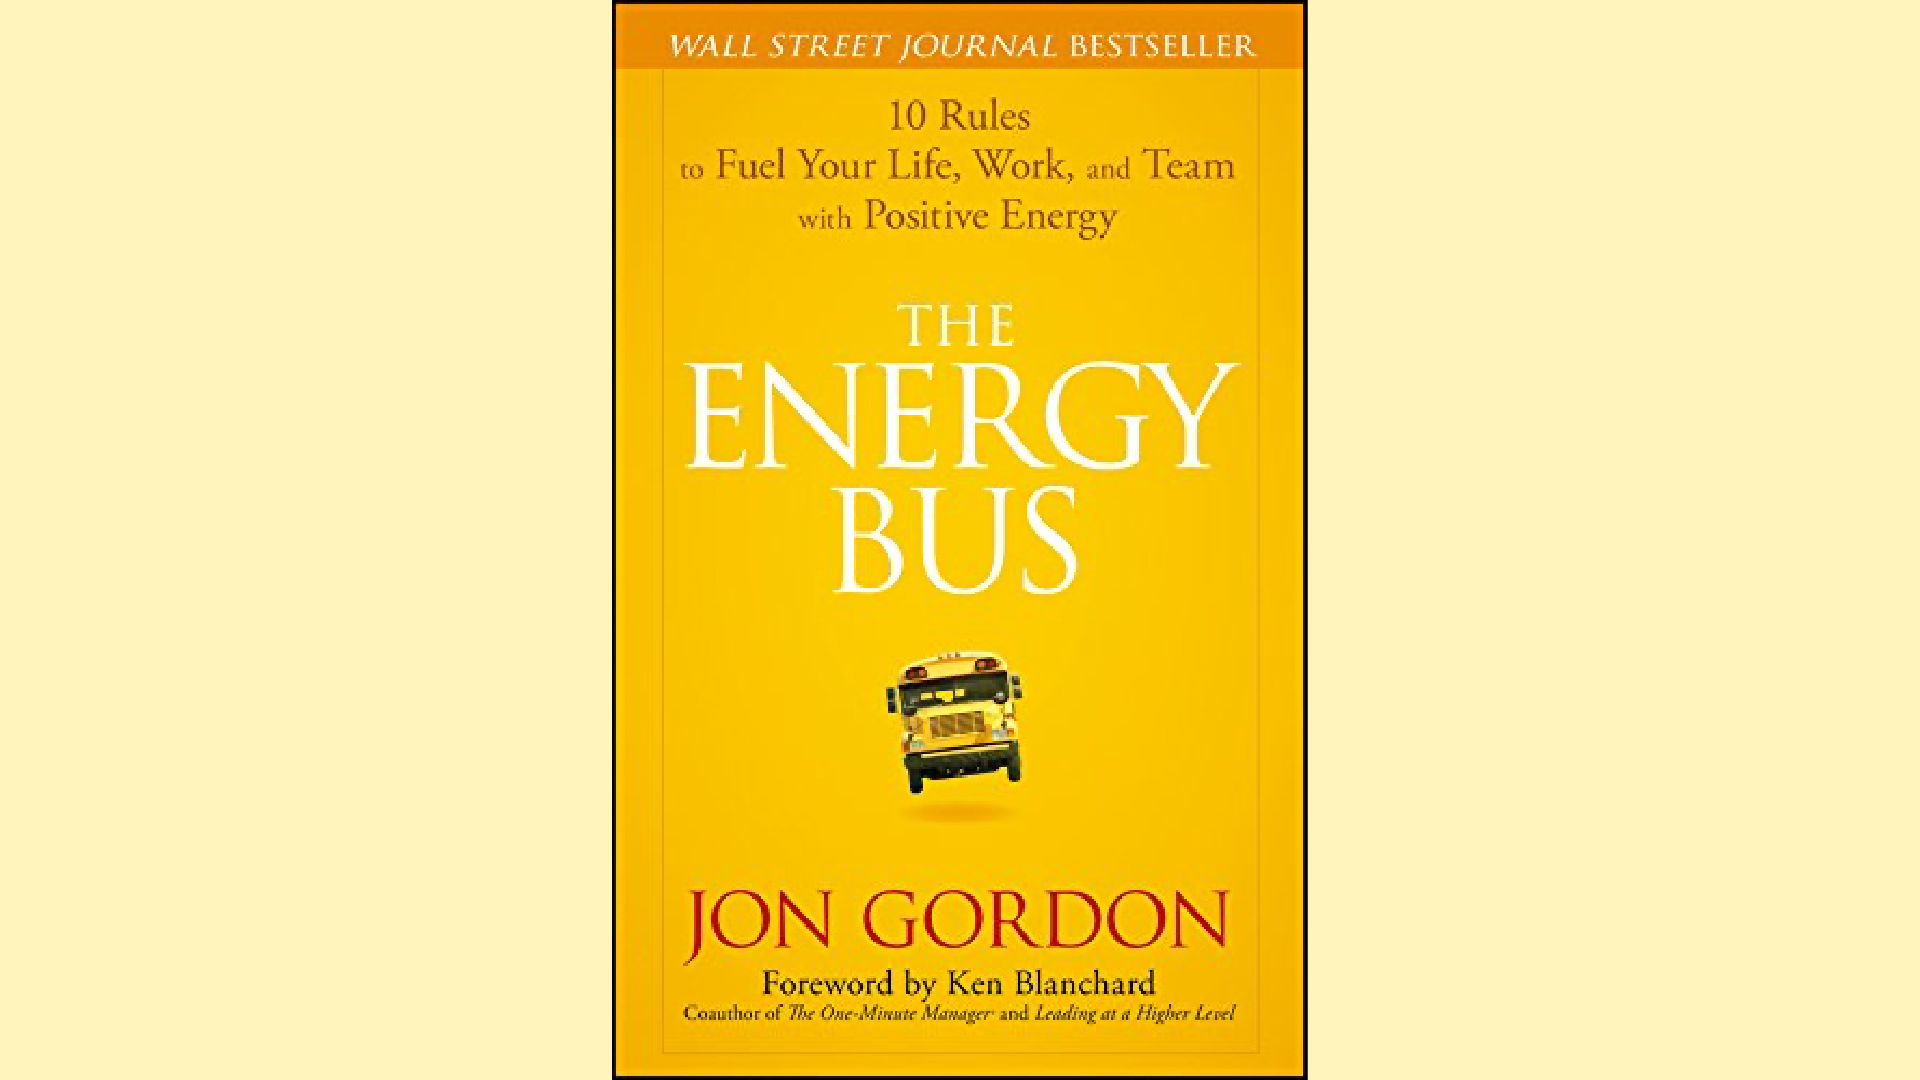 Summary: The Energy Bus: 10 Rules to Fuel Your Life, Work, and Team with Positive Energy